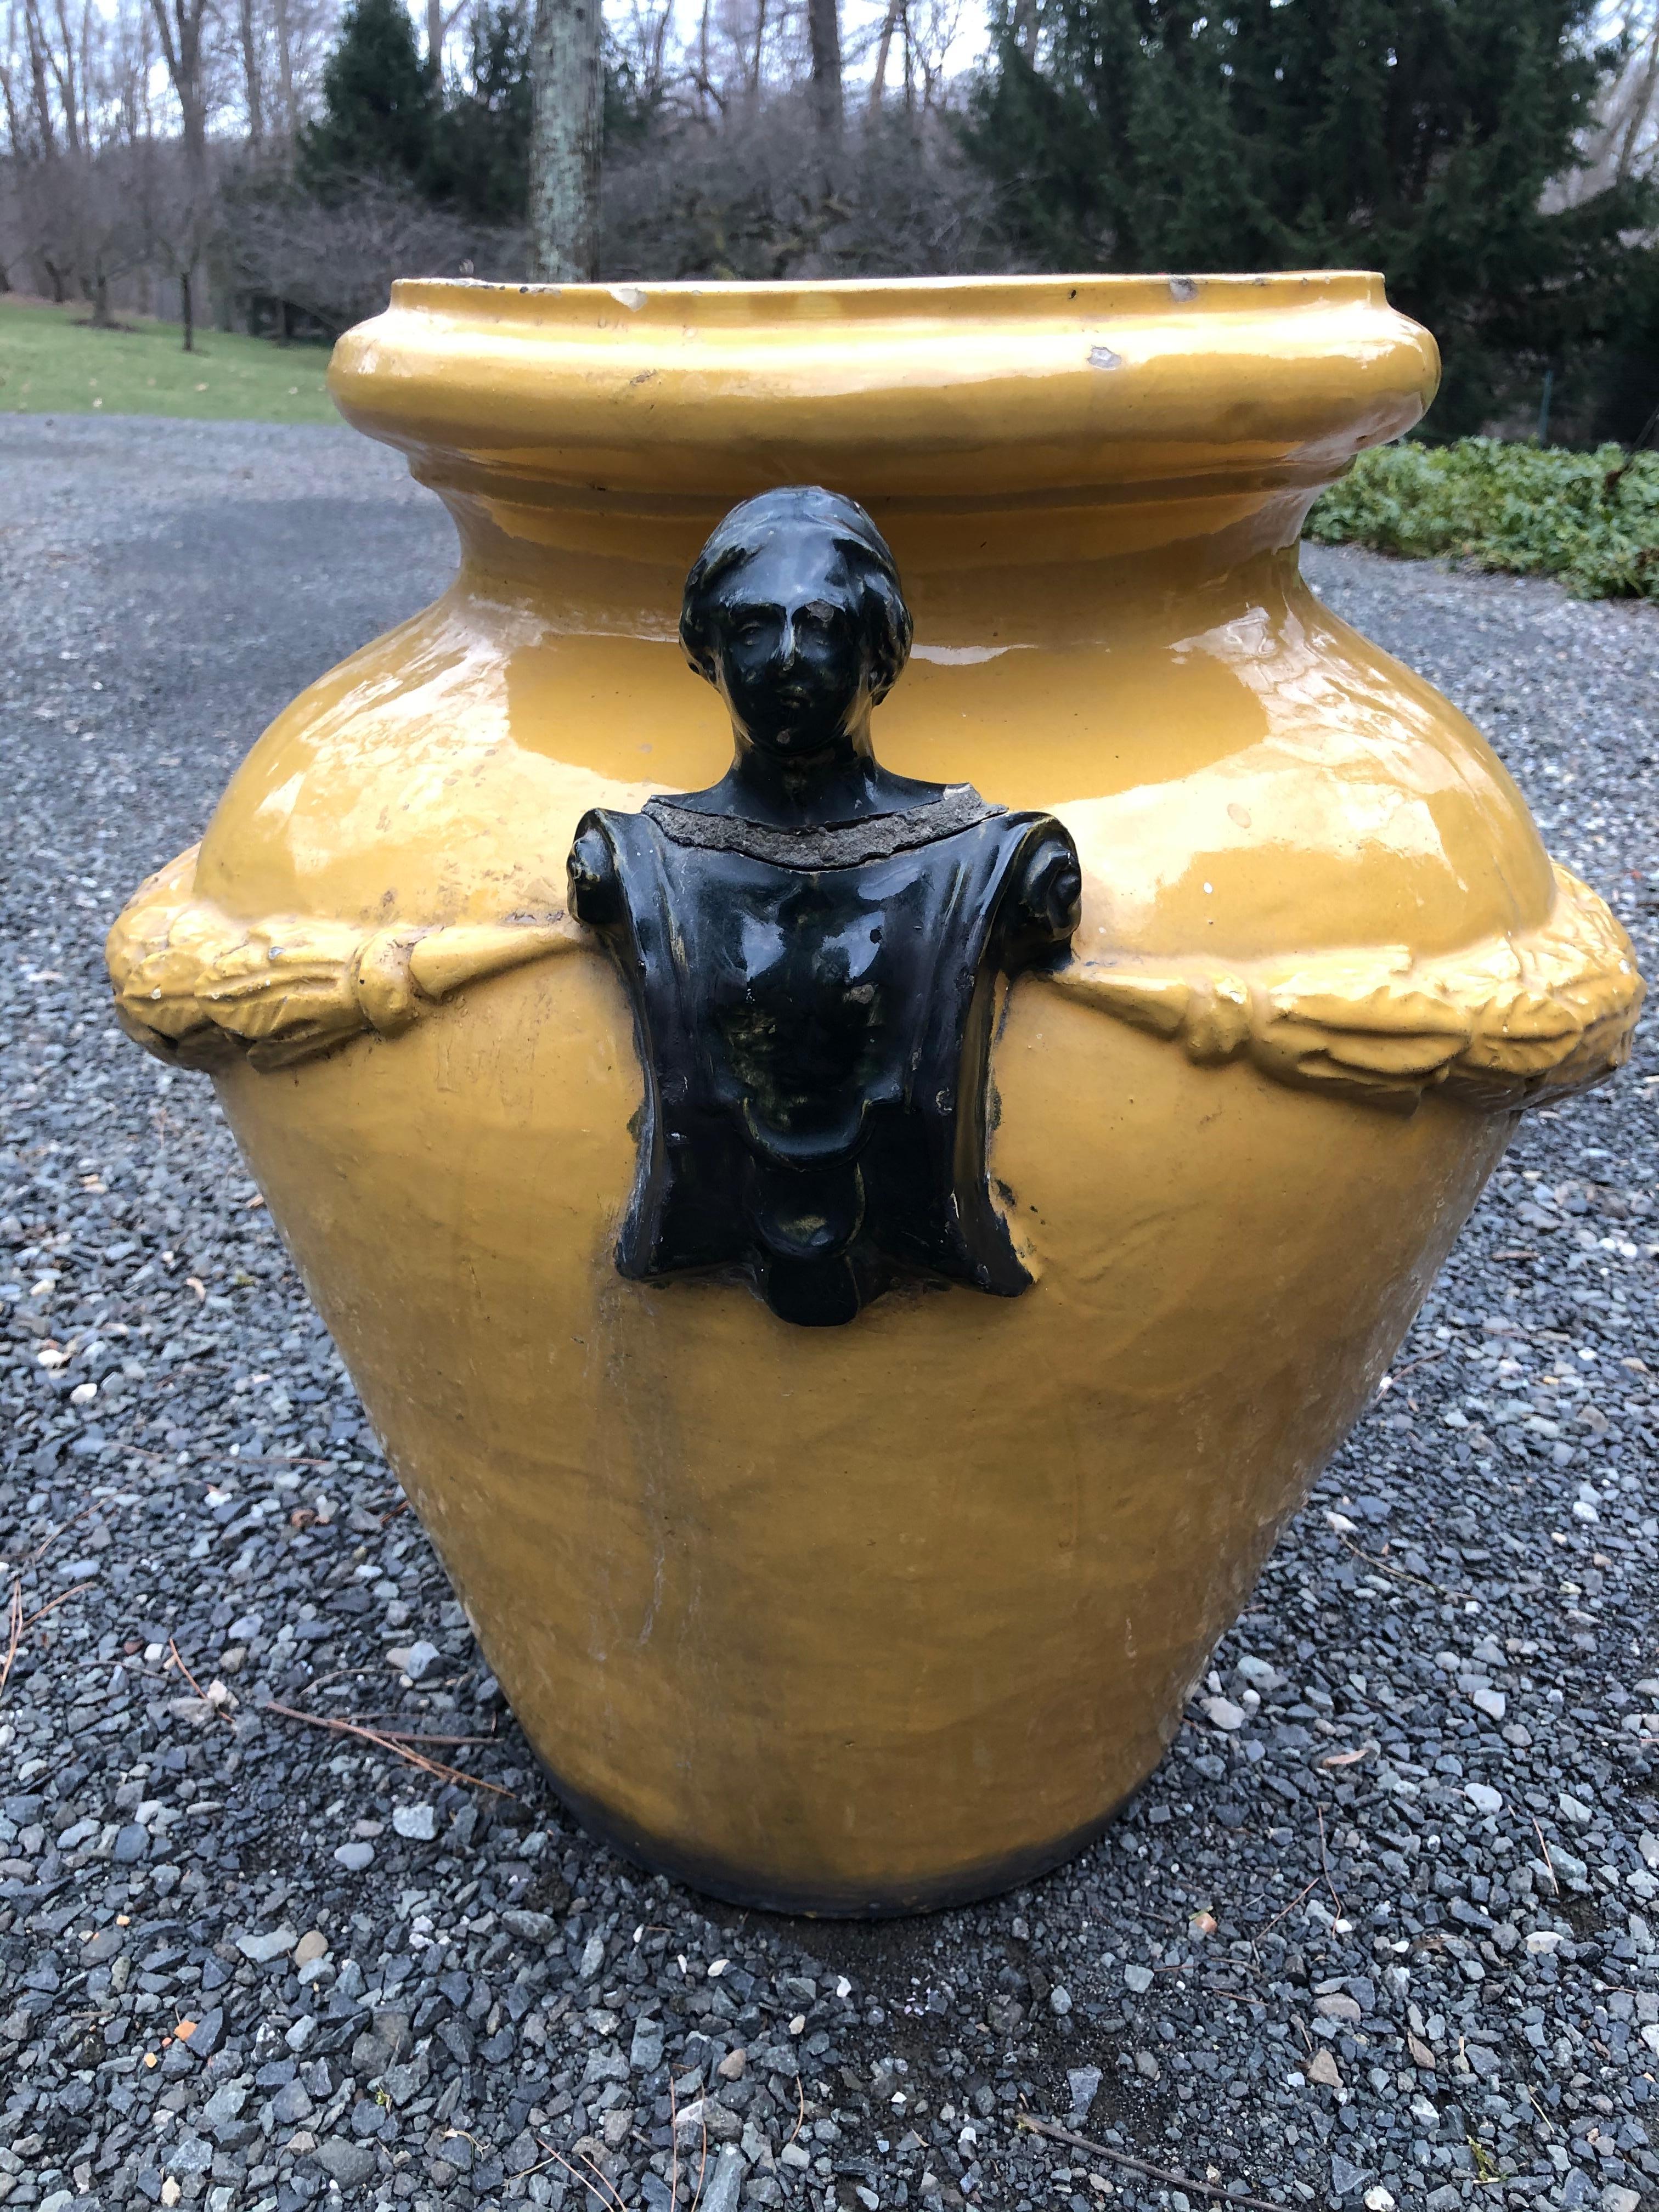 A fabulous pair of substantial jardinières from Italy. Glazed in a great shade of saffron, the jardinières are made of terracotta. Each has a raised swag of leaves surrounding it. The handles depict the torso of a decorated gentleman. These